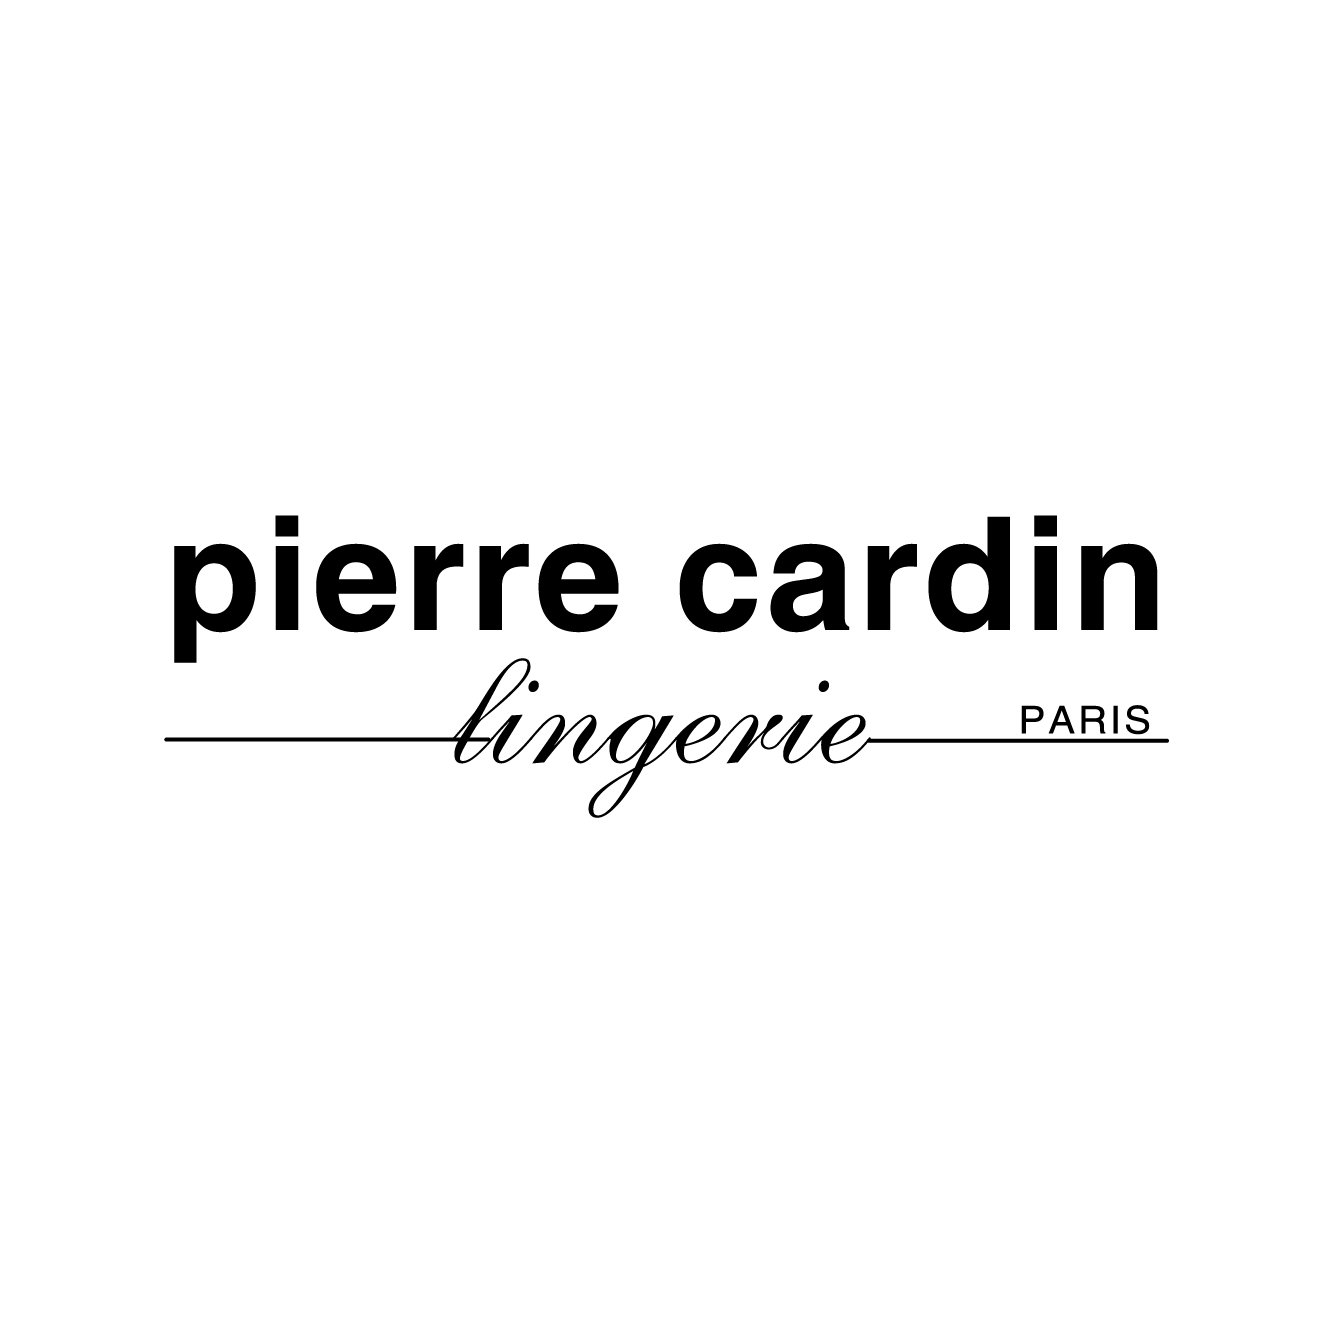 Pierre Cardin Parkway Parade_0920231a. Website DirectoryPierre Cardin Lingerie Branding - logo image (320px by 320px).png